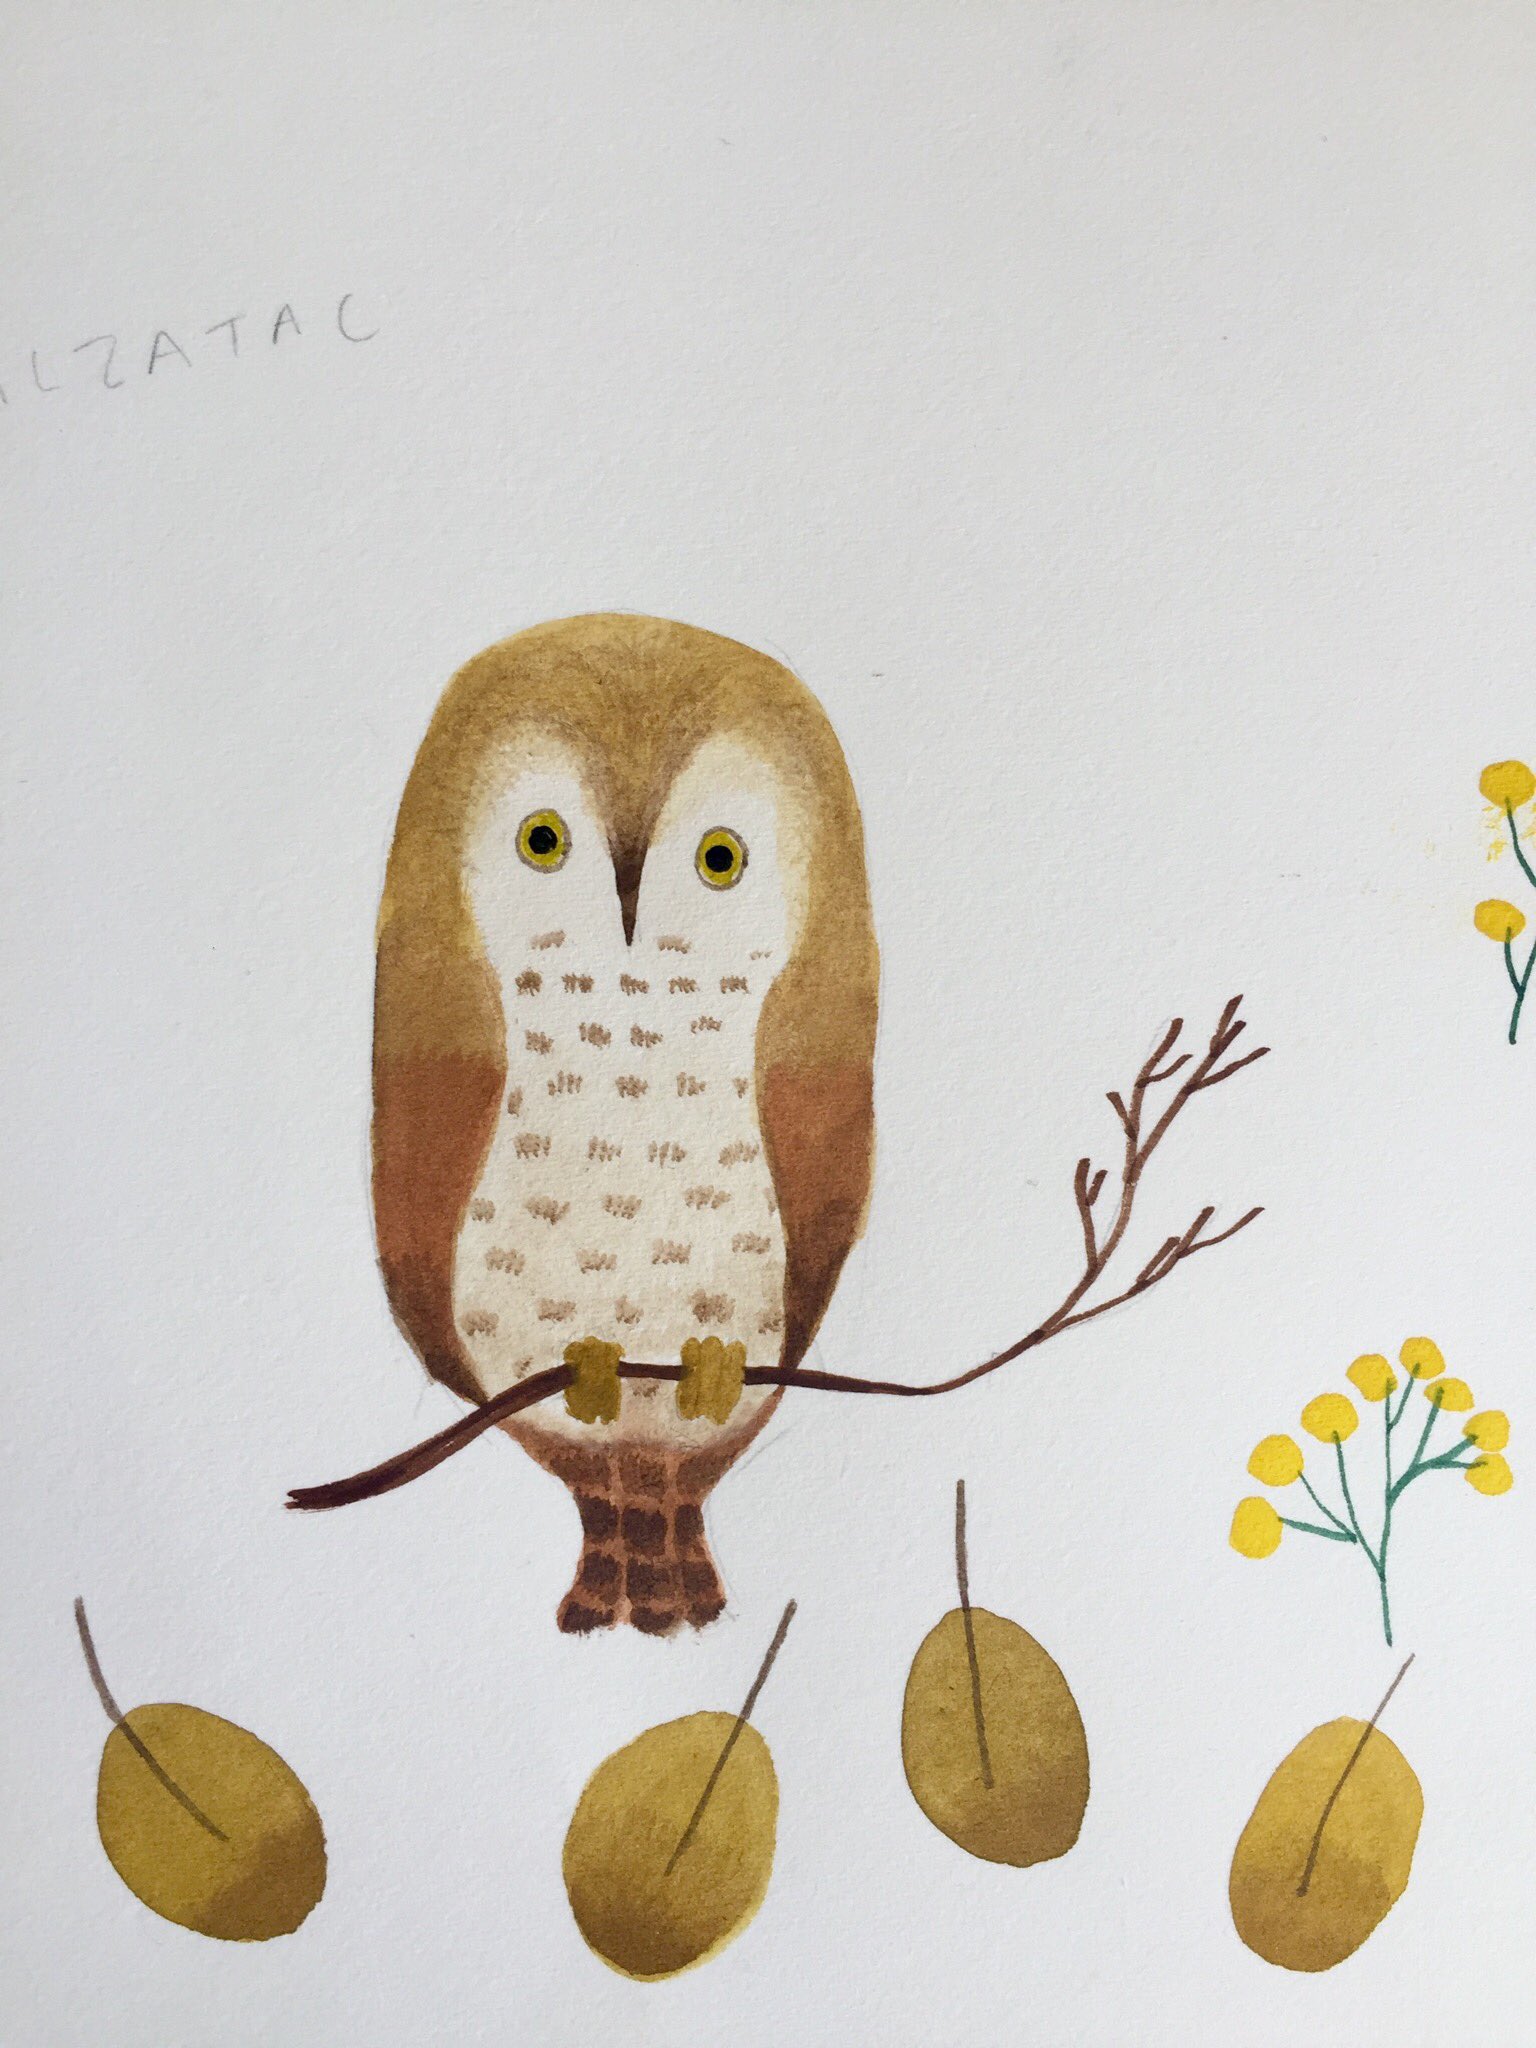 Maki Hasegawa Owl For A Illustration Project In Progress Will Be Revealed Soon Gufo フクロウ イラスト 水彩 Watercolour T Co Zxm4x9d5mw Twitter